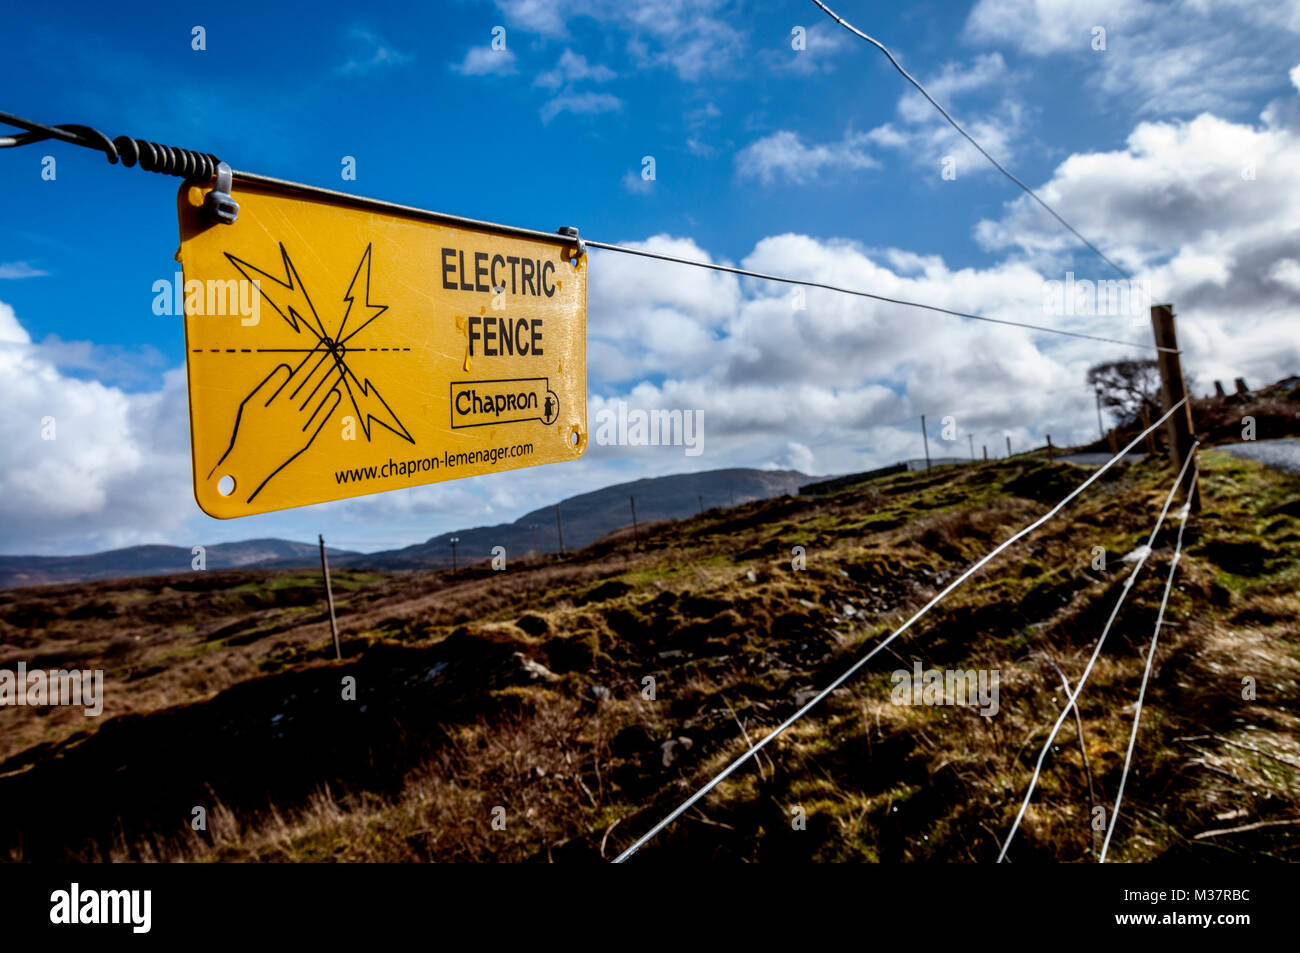 Electric fence Chapron lemenager signage warning for safety in rural Ireland Stock Photo